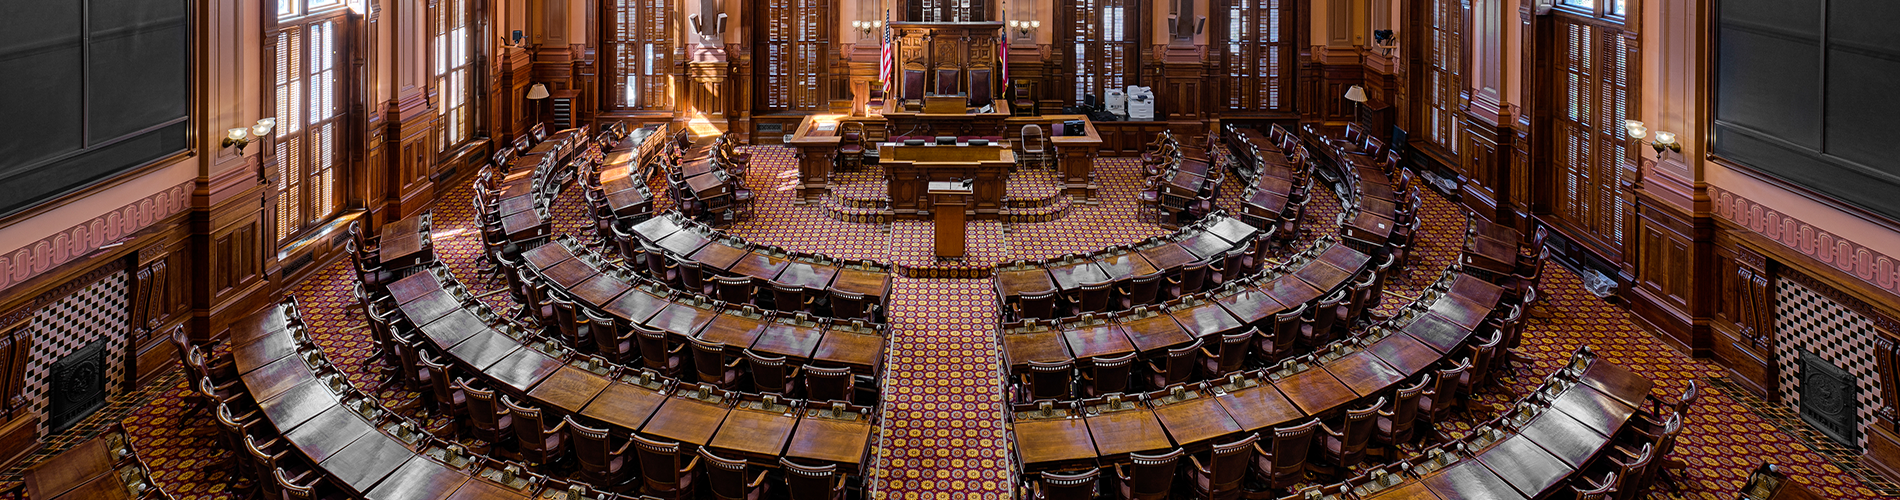 State Bar of Georgia Interior Page Banner